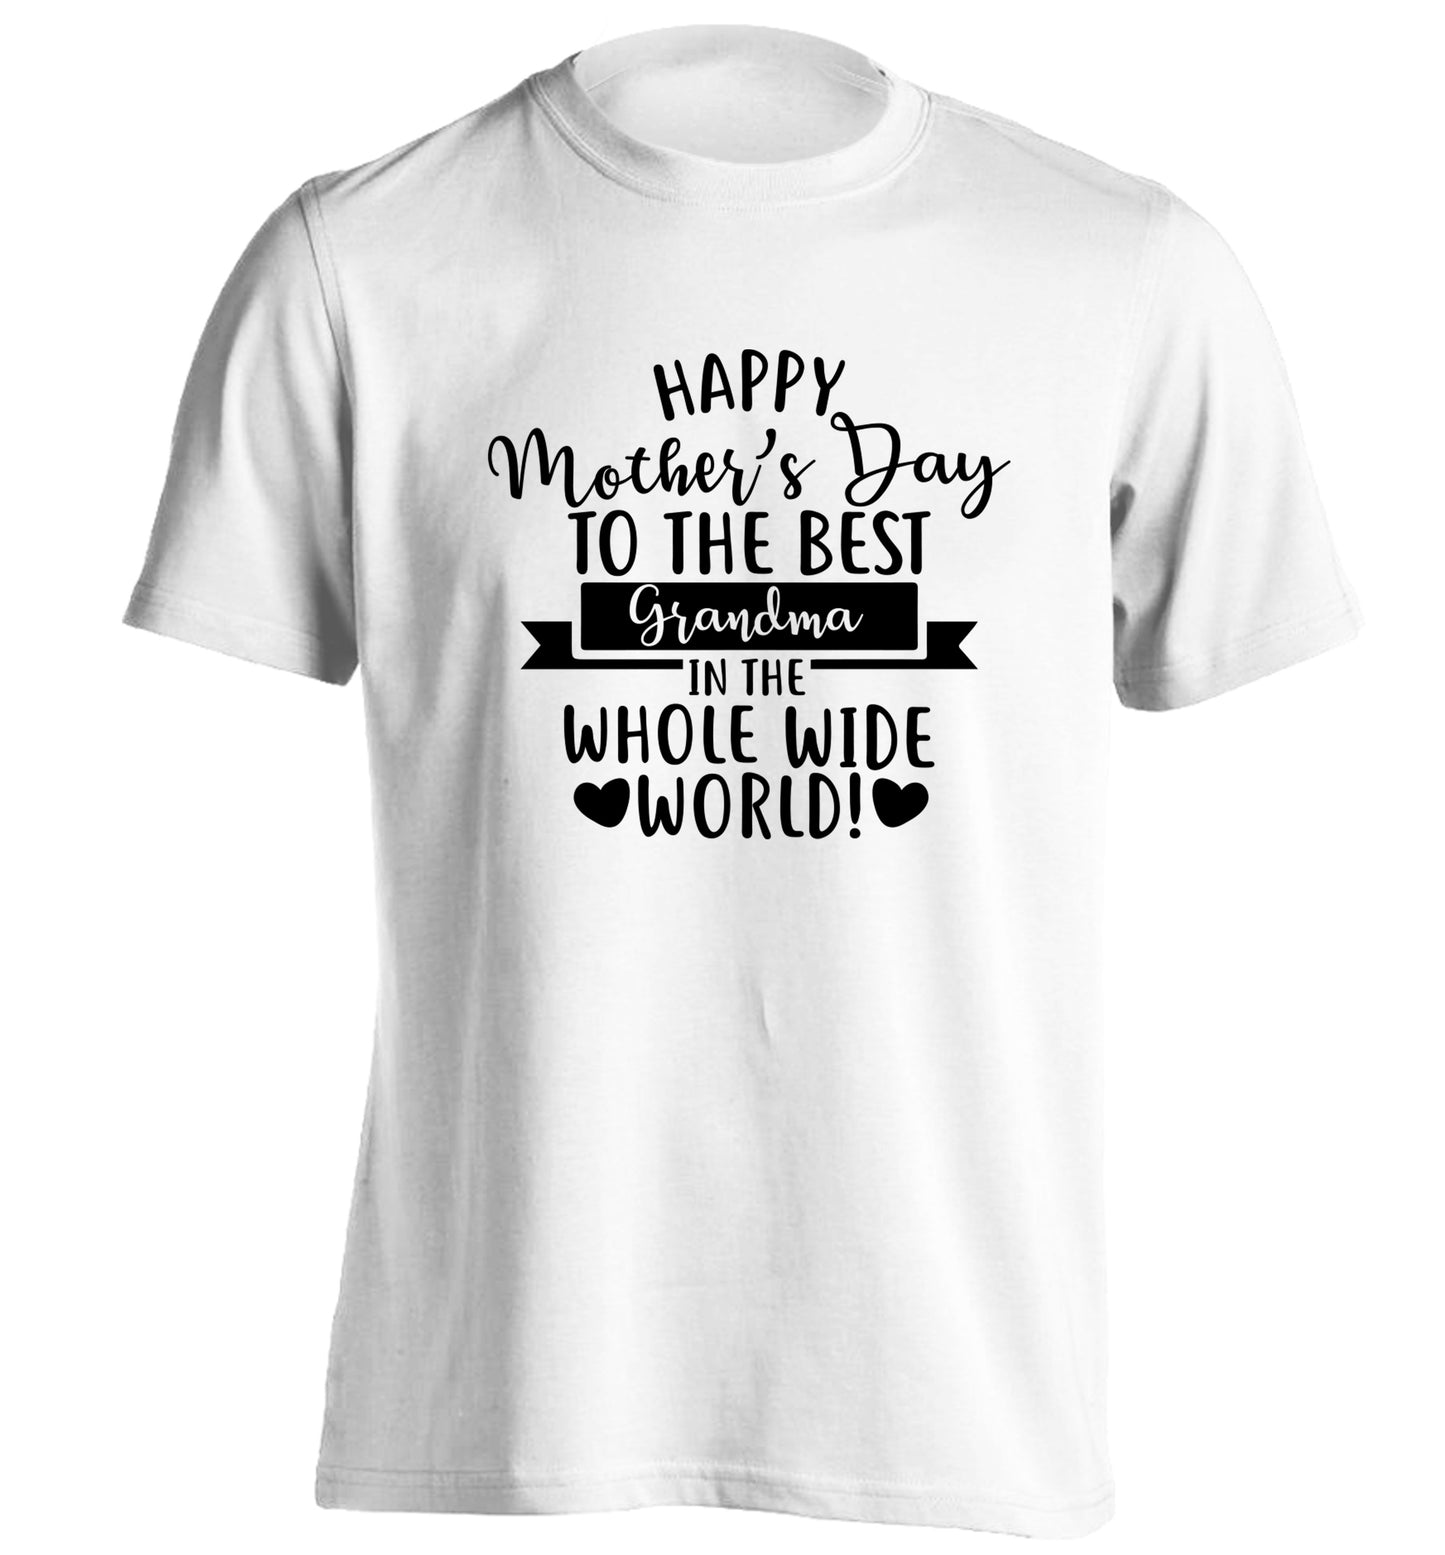 Happy mother's day to the best Grandma in the world adults unisex white Tshirt 2XL